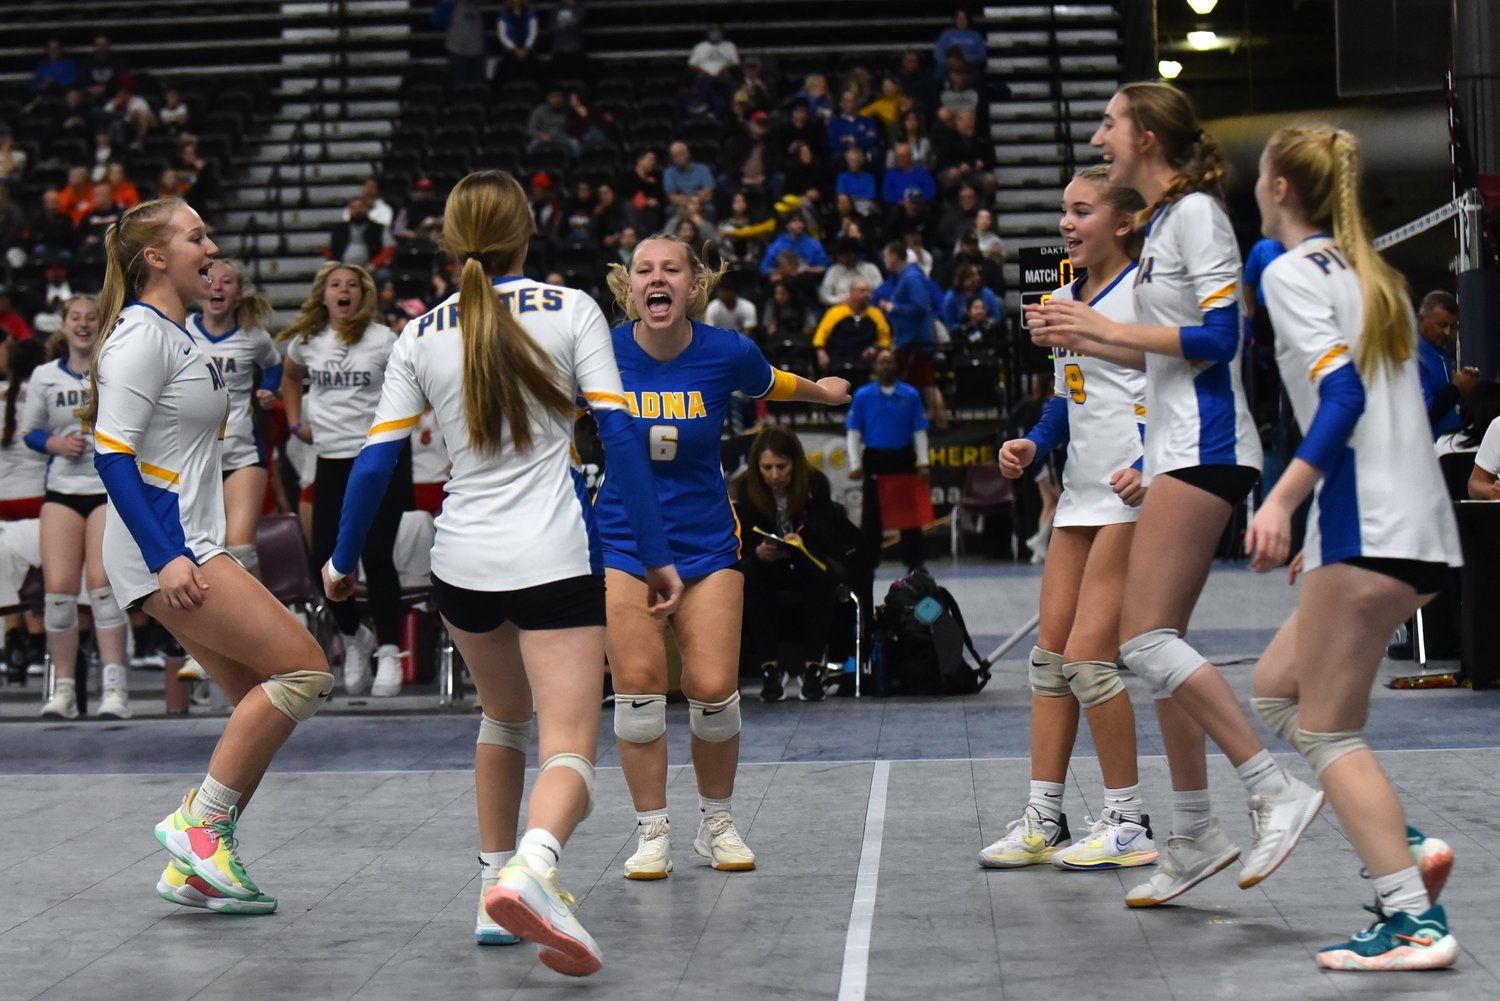 The Adna volleyball team celebrates a point during the first set of its three-set win over No. 12 Tri-Cities Prep in the first round of the 2B state volleyball tournament on Nov. 10, at the Yakima Valley SunDome.